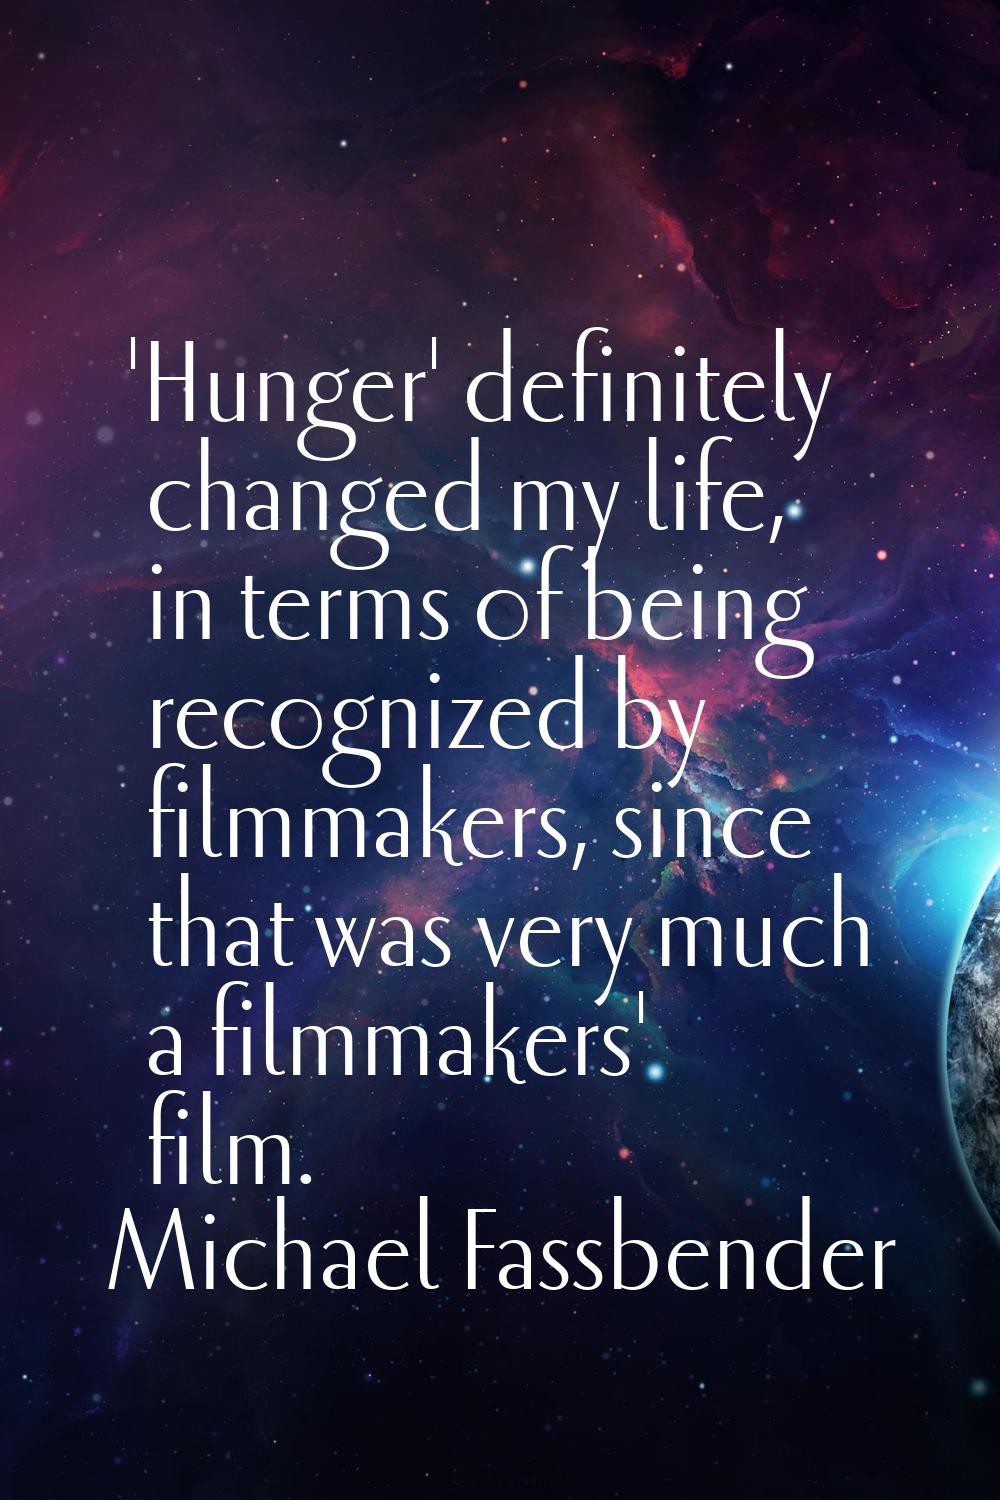 'Hunger' definitely changed my life, in terms of being recognized by filmmakers, since that was ver